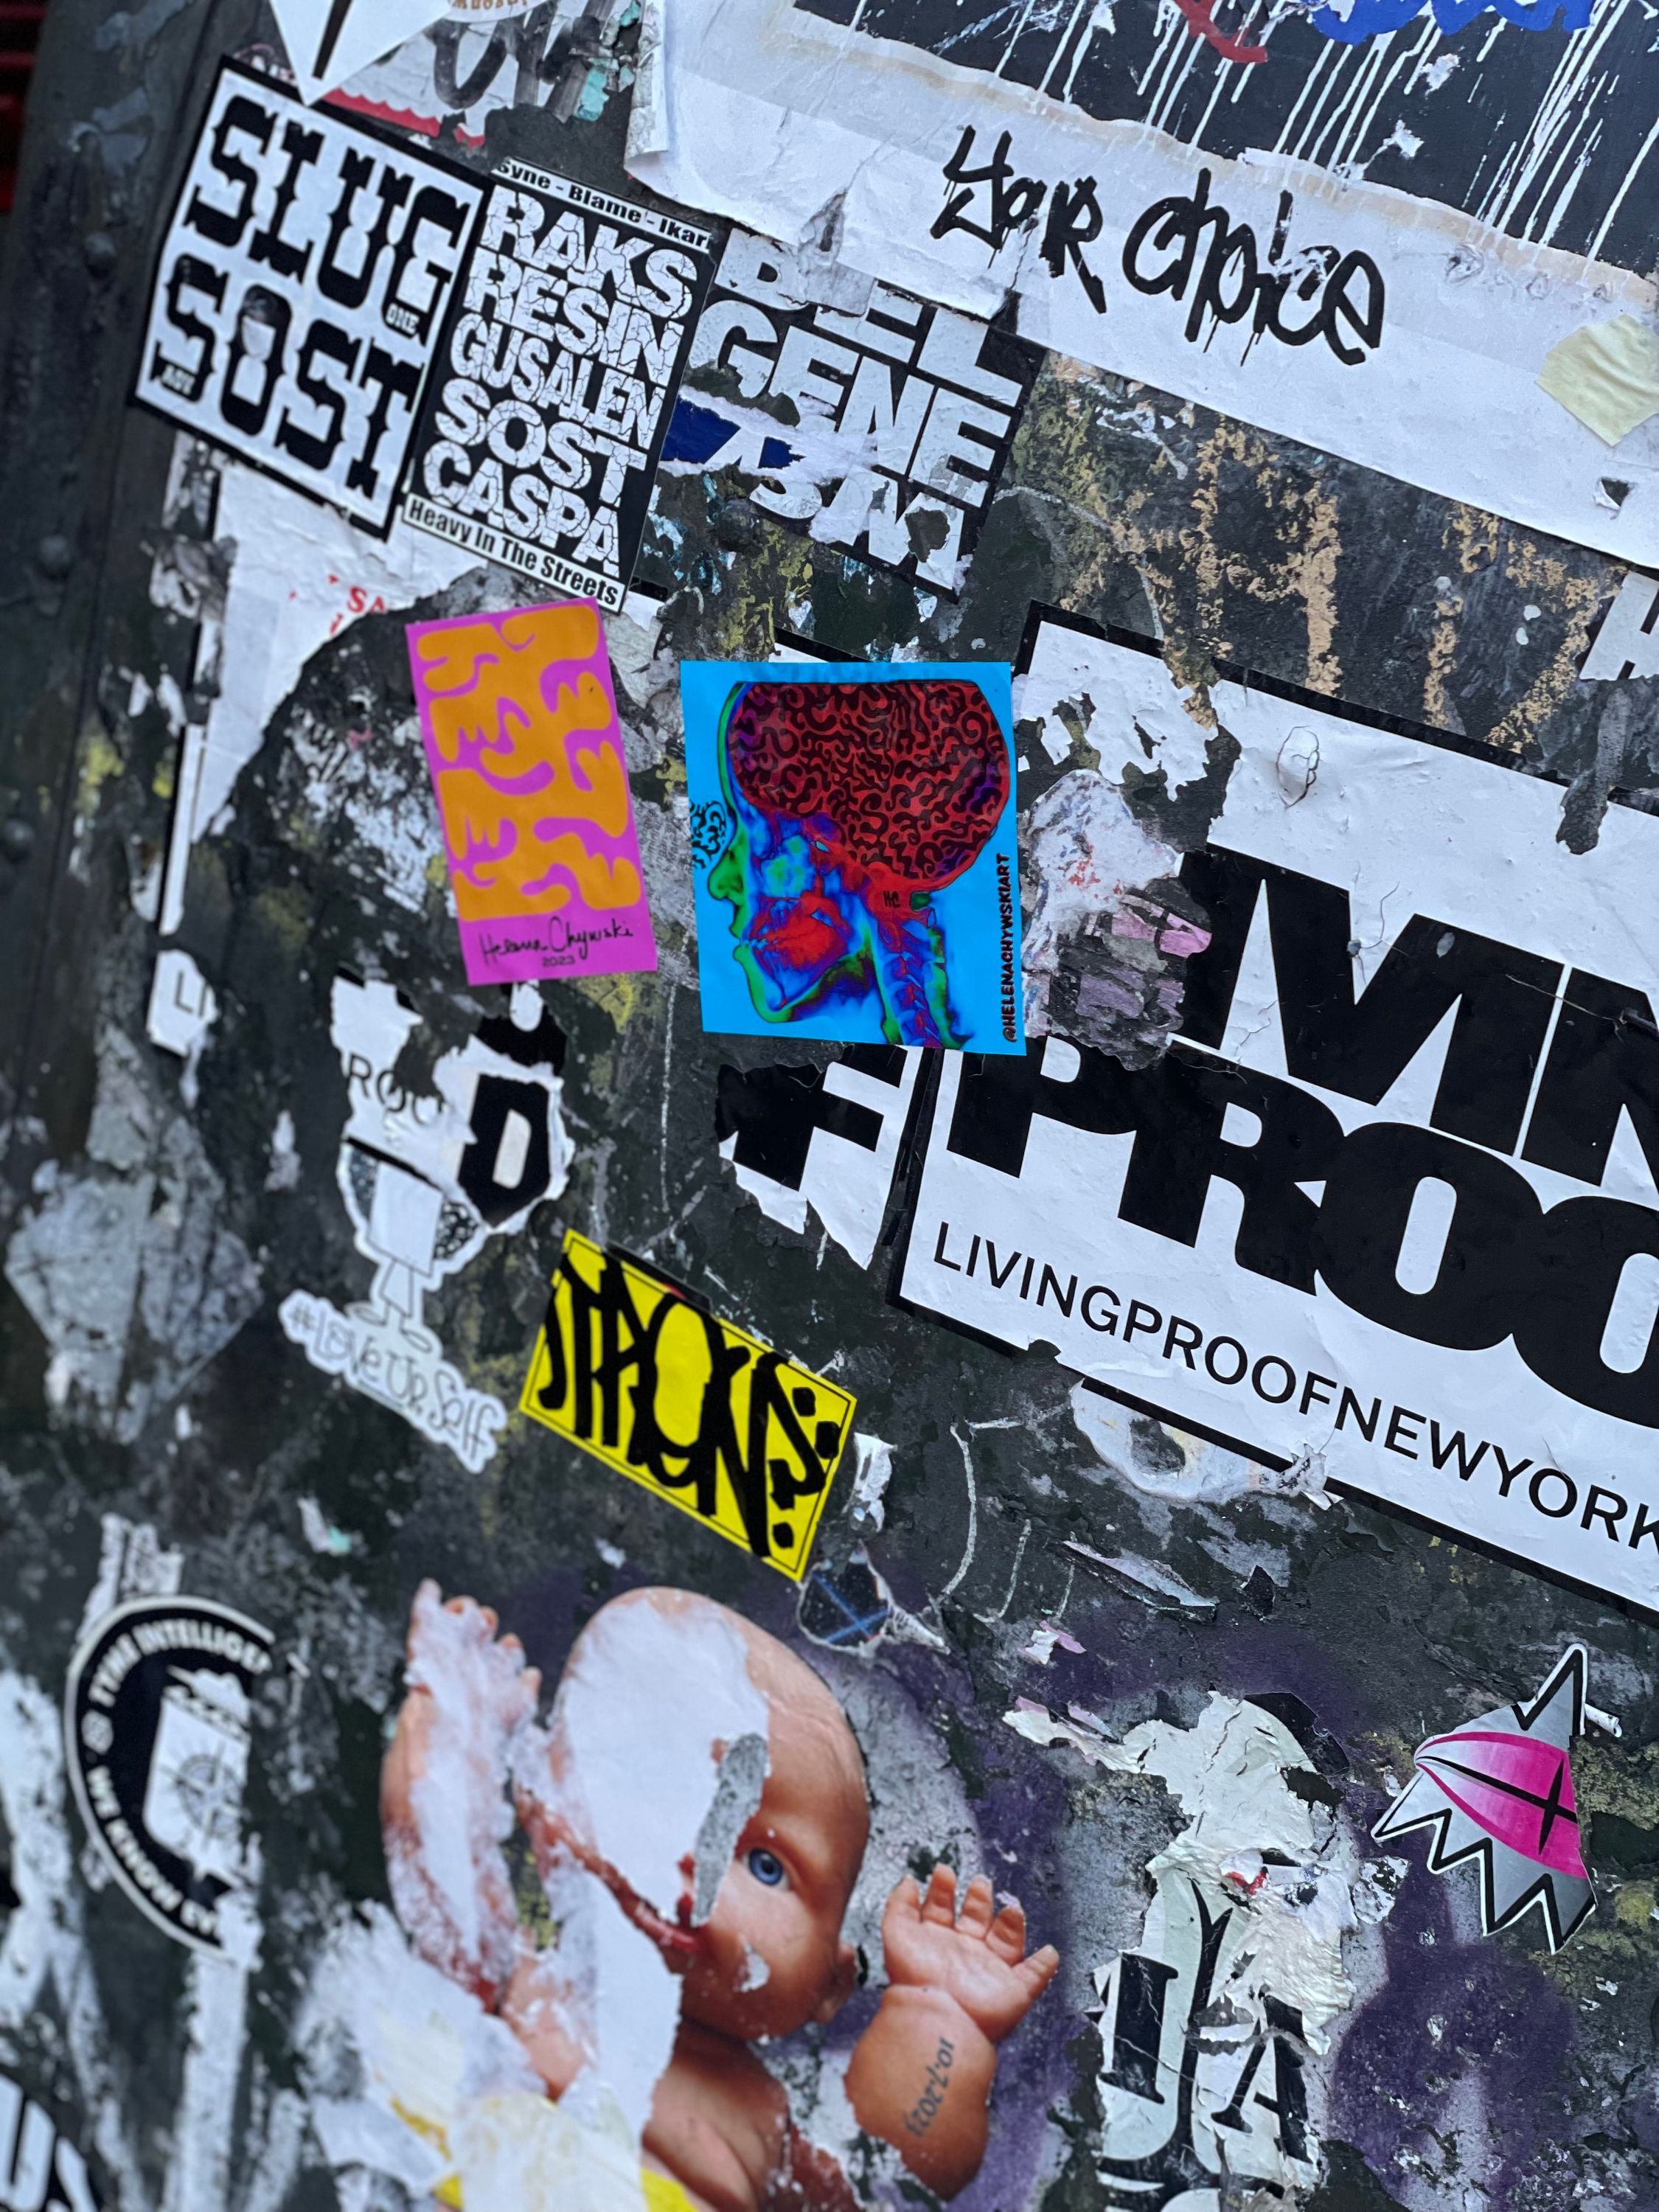 My stickers are currently spread all over NYC! If you see one, take a picture and tag me!